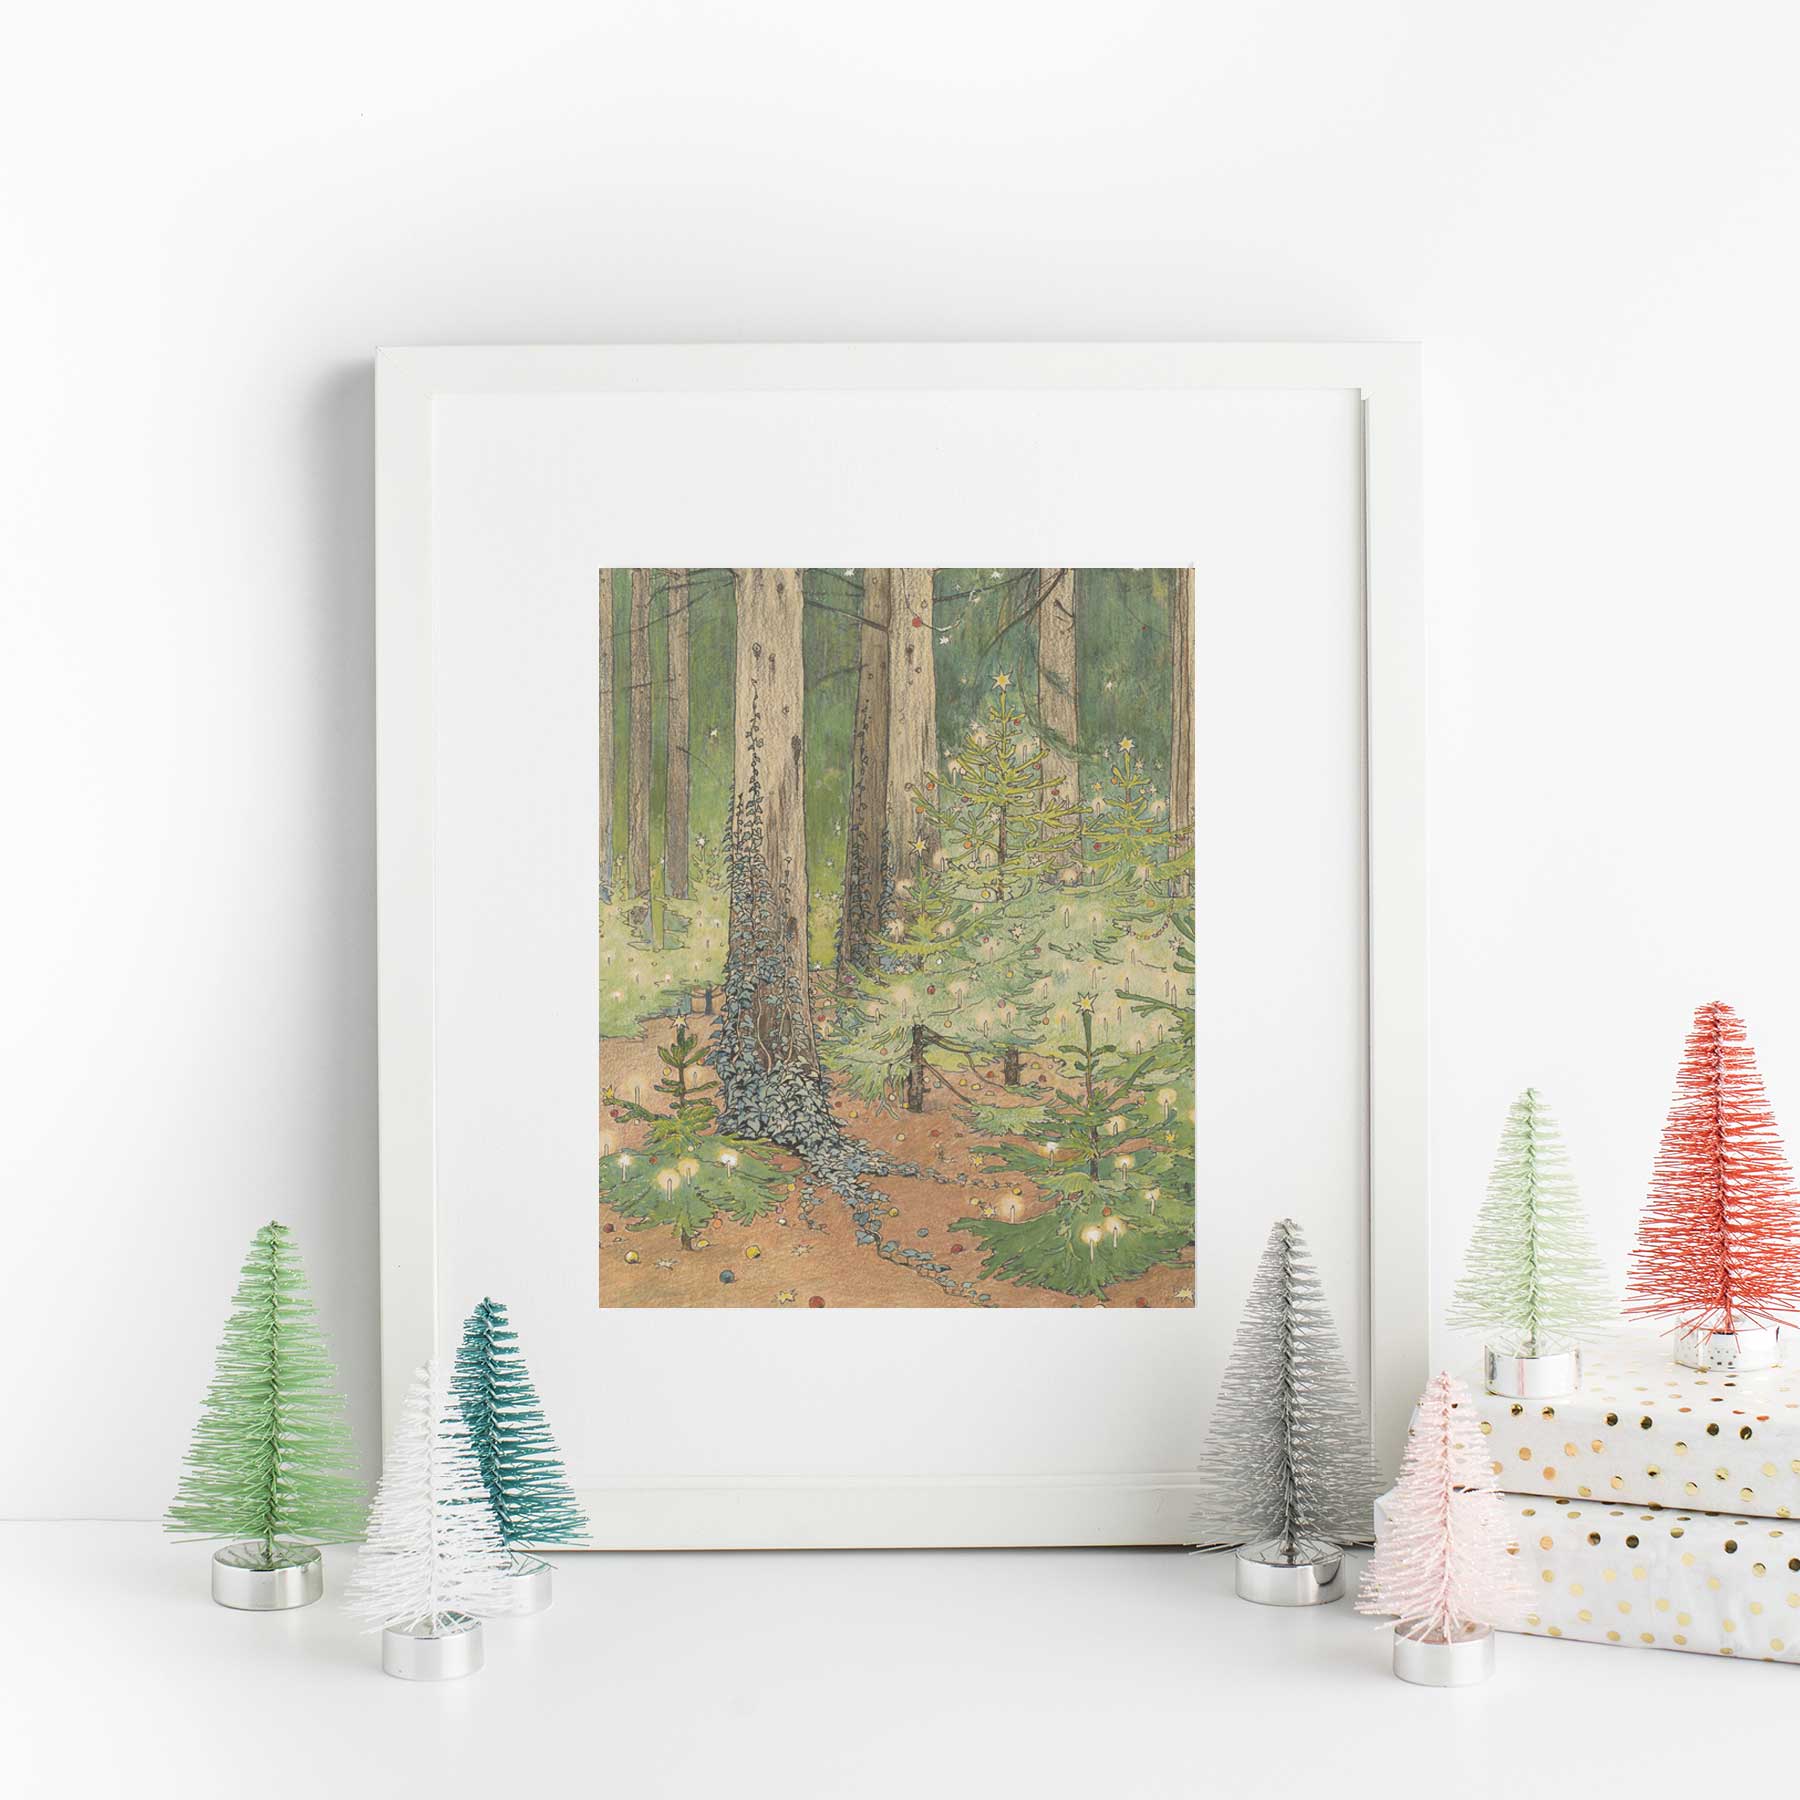 In the Christmas tree Forest is the playful art piece perfect for the Holiday Season. With the fairytale quality depicting Christmas tree growing in the forest this art is sure to put a smile on your face and add a dose of Christmas cheer to your space.